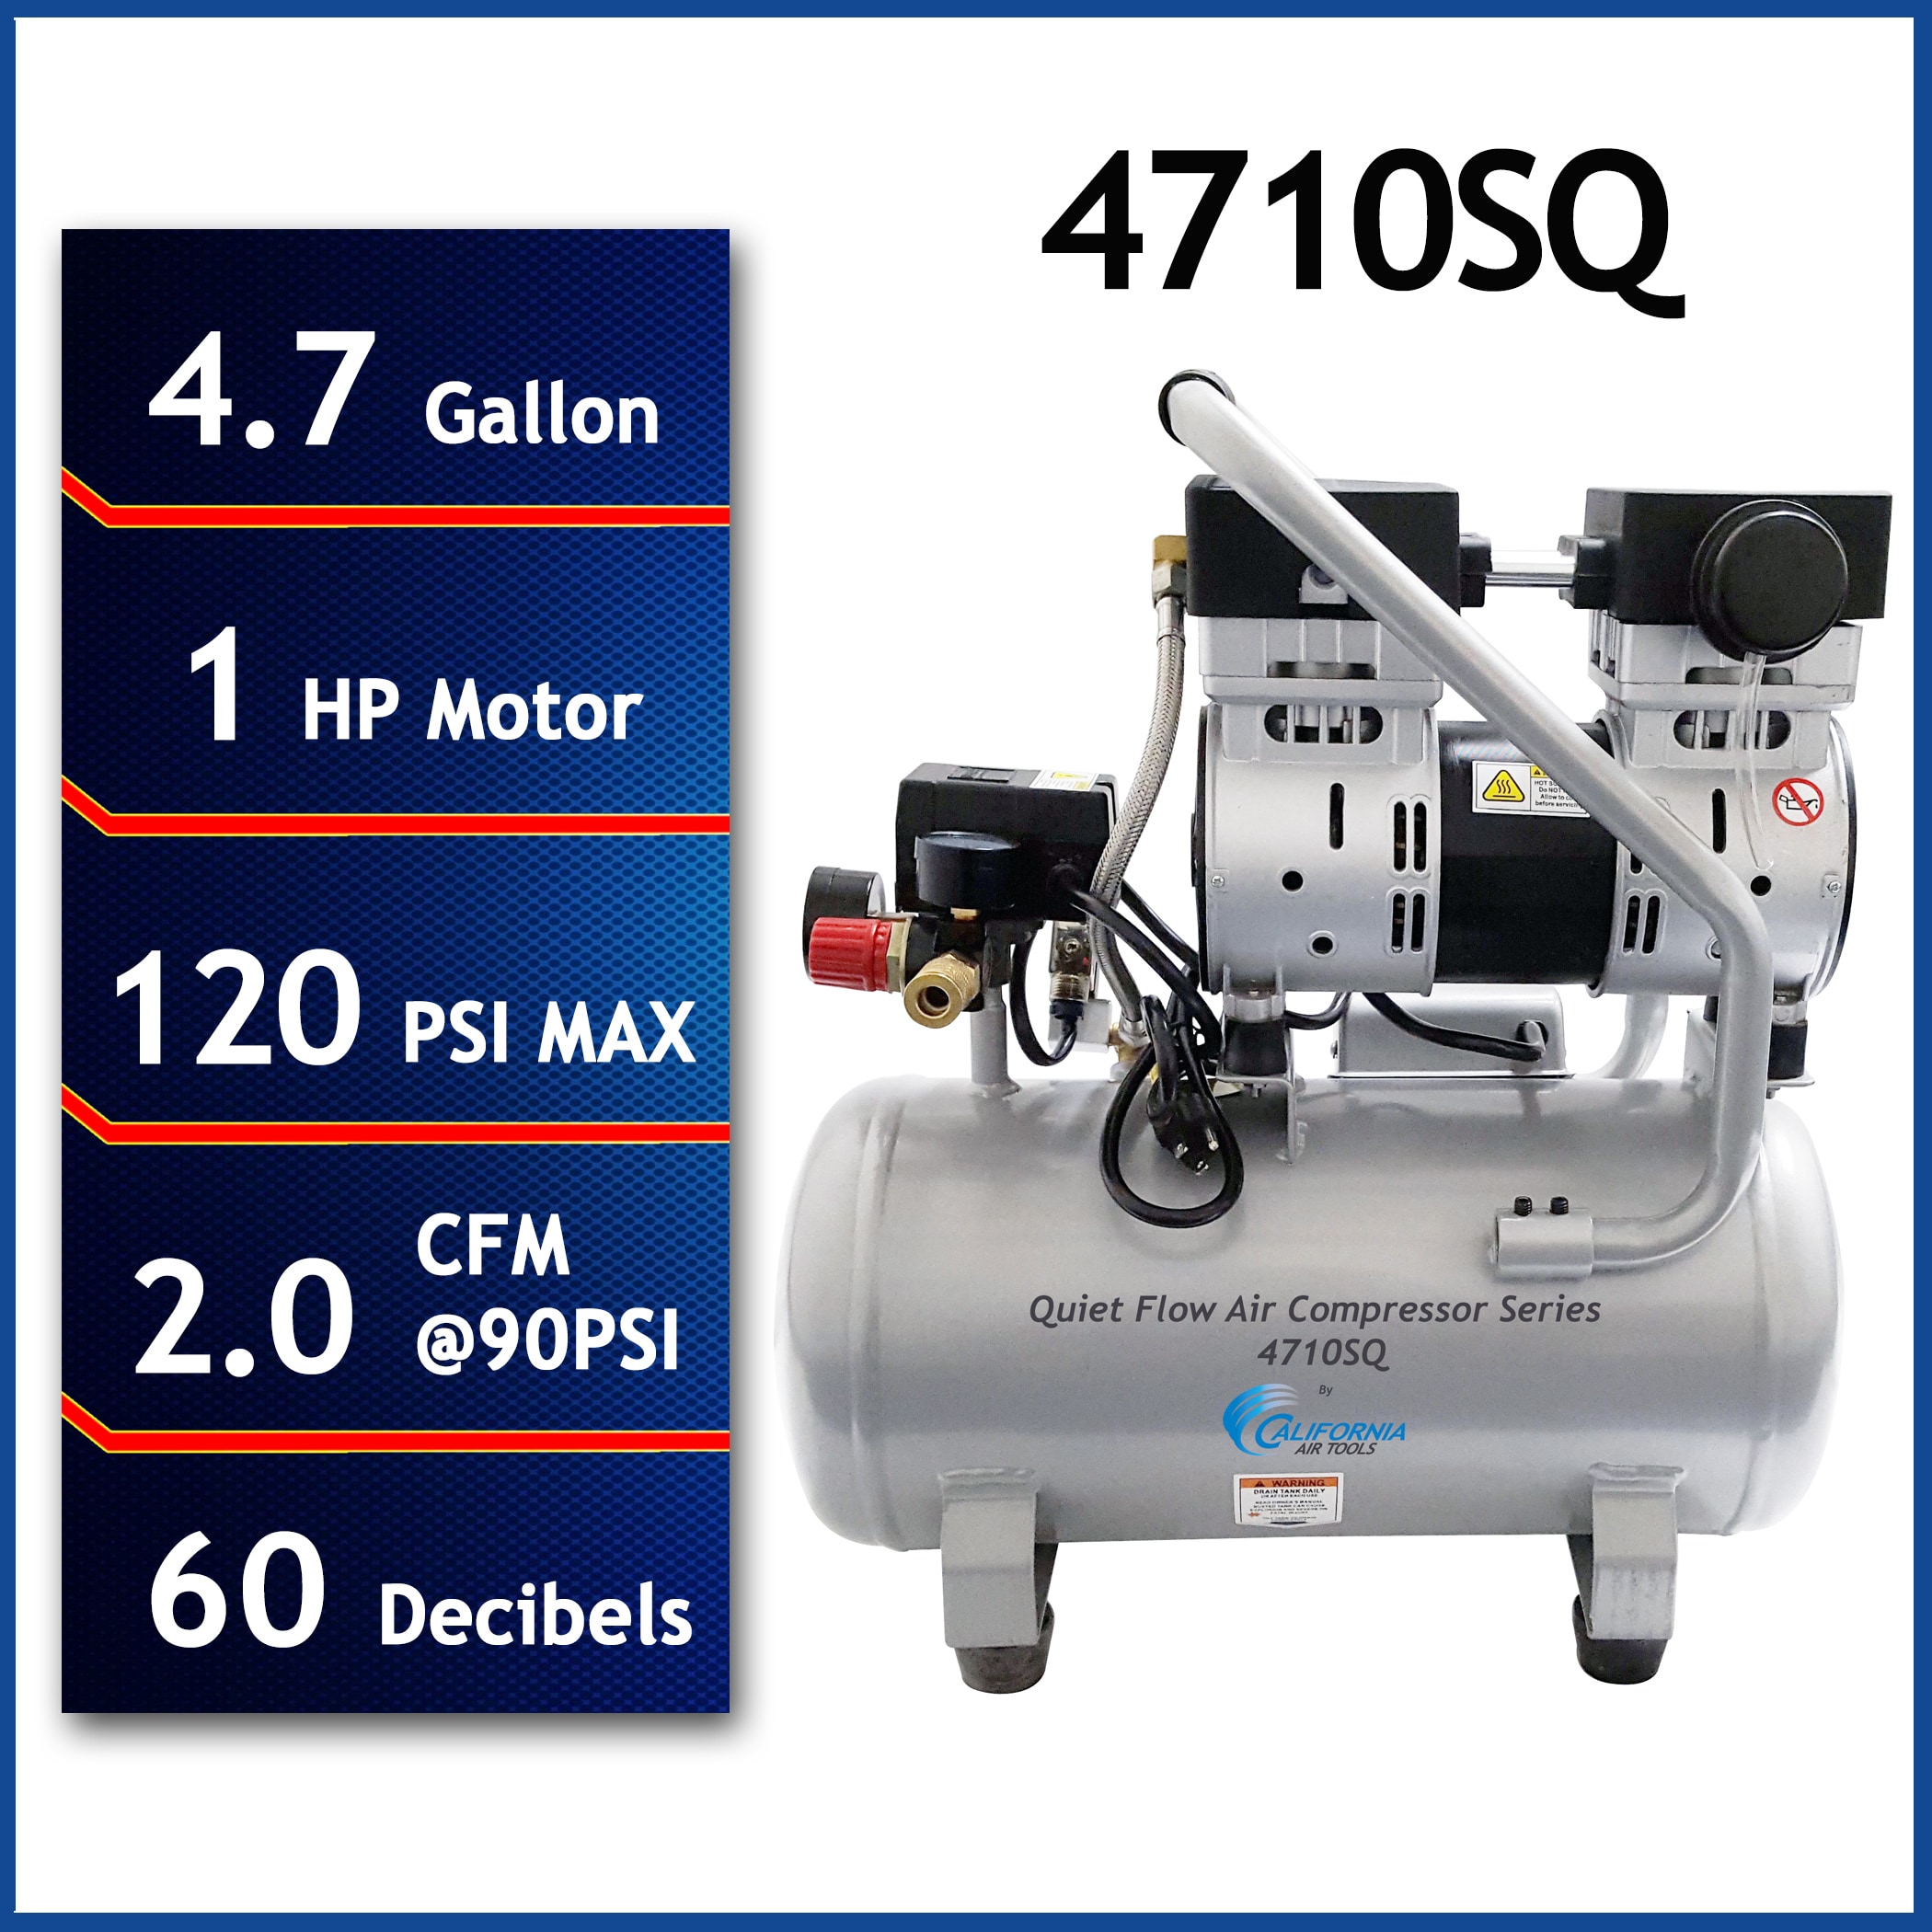 The Best Airbrush Compressors for Miniature Painting - Noise Levels Measured